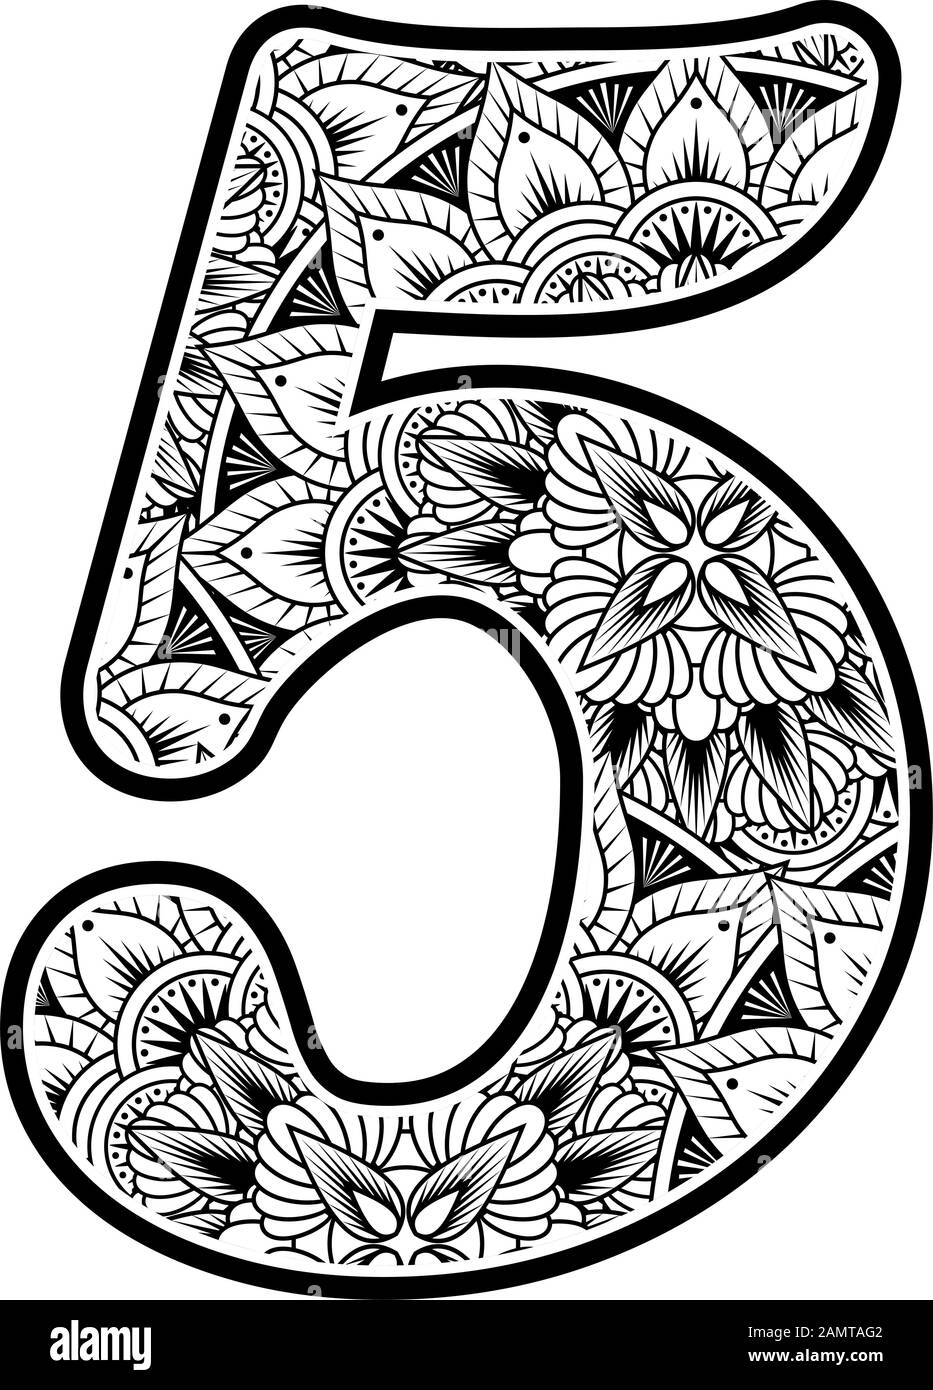 number 5 with abstract flowers ornaments in black and white. design inspired from mandala art style for coloring. Isolated on white background Stock Vector